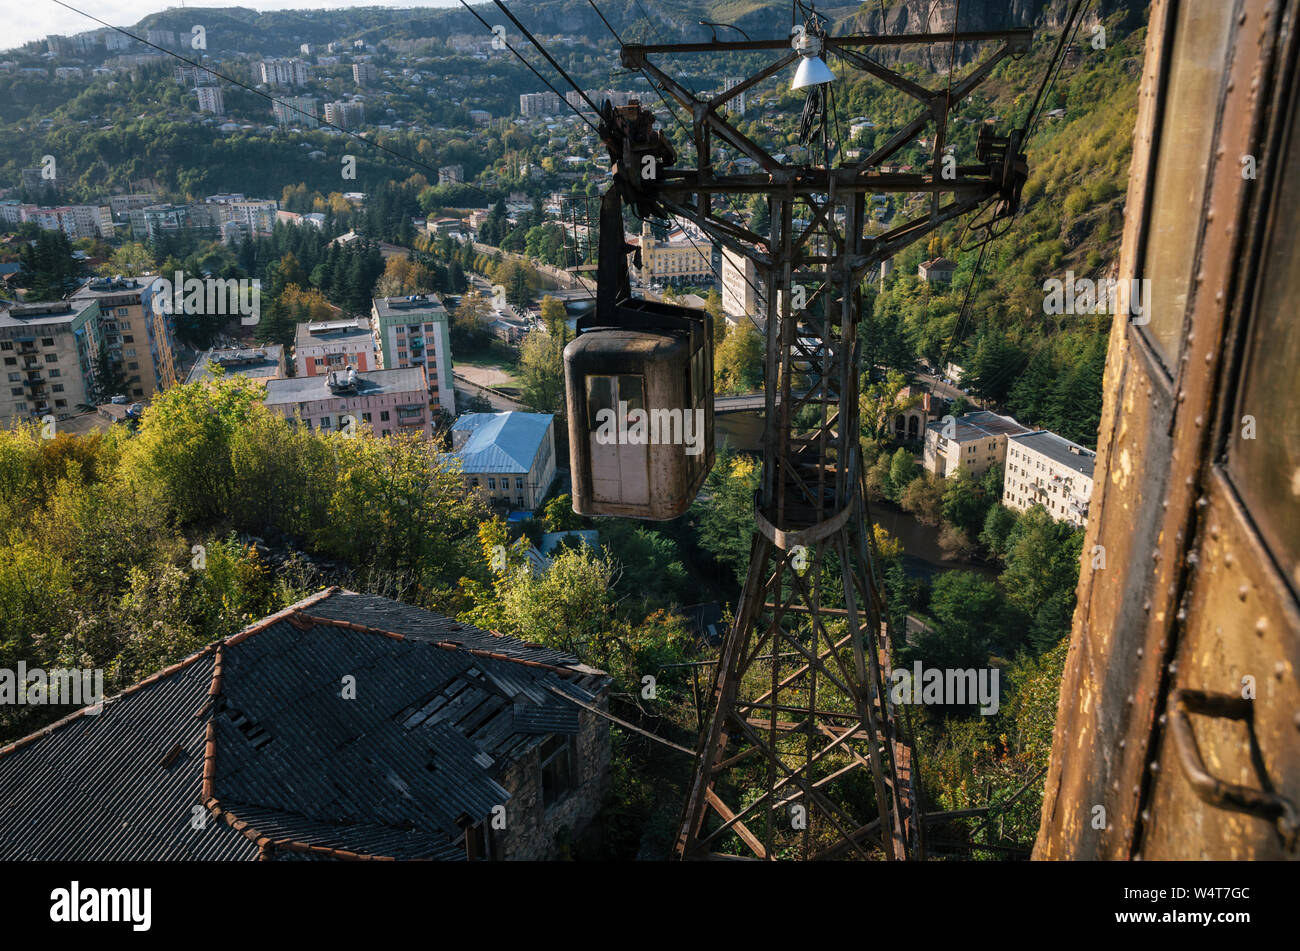 Derelict and rundown aerial old tram ropeway or cable car leading to the abandoned area in Chiatura. Industrial landmark of Georgia. Stock Photo